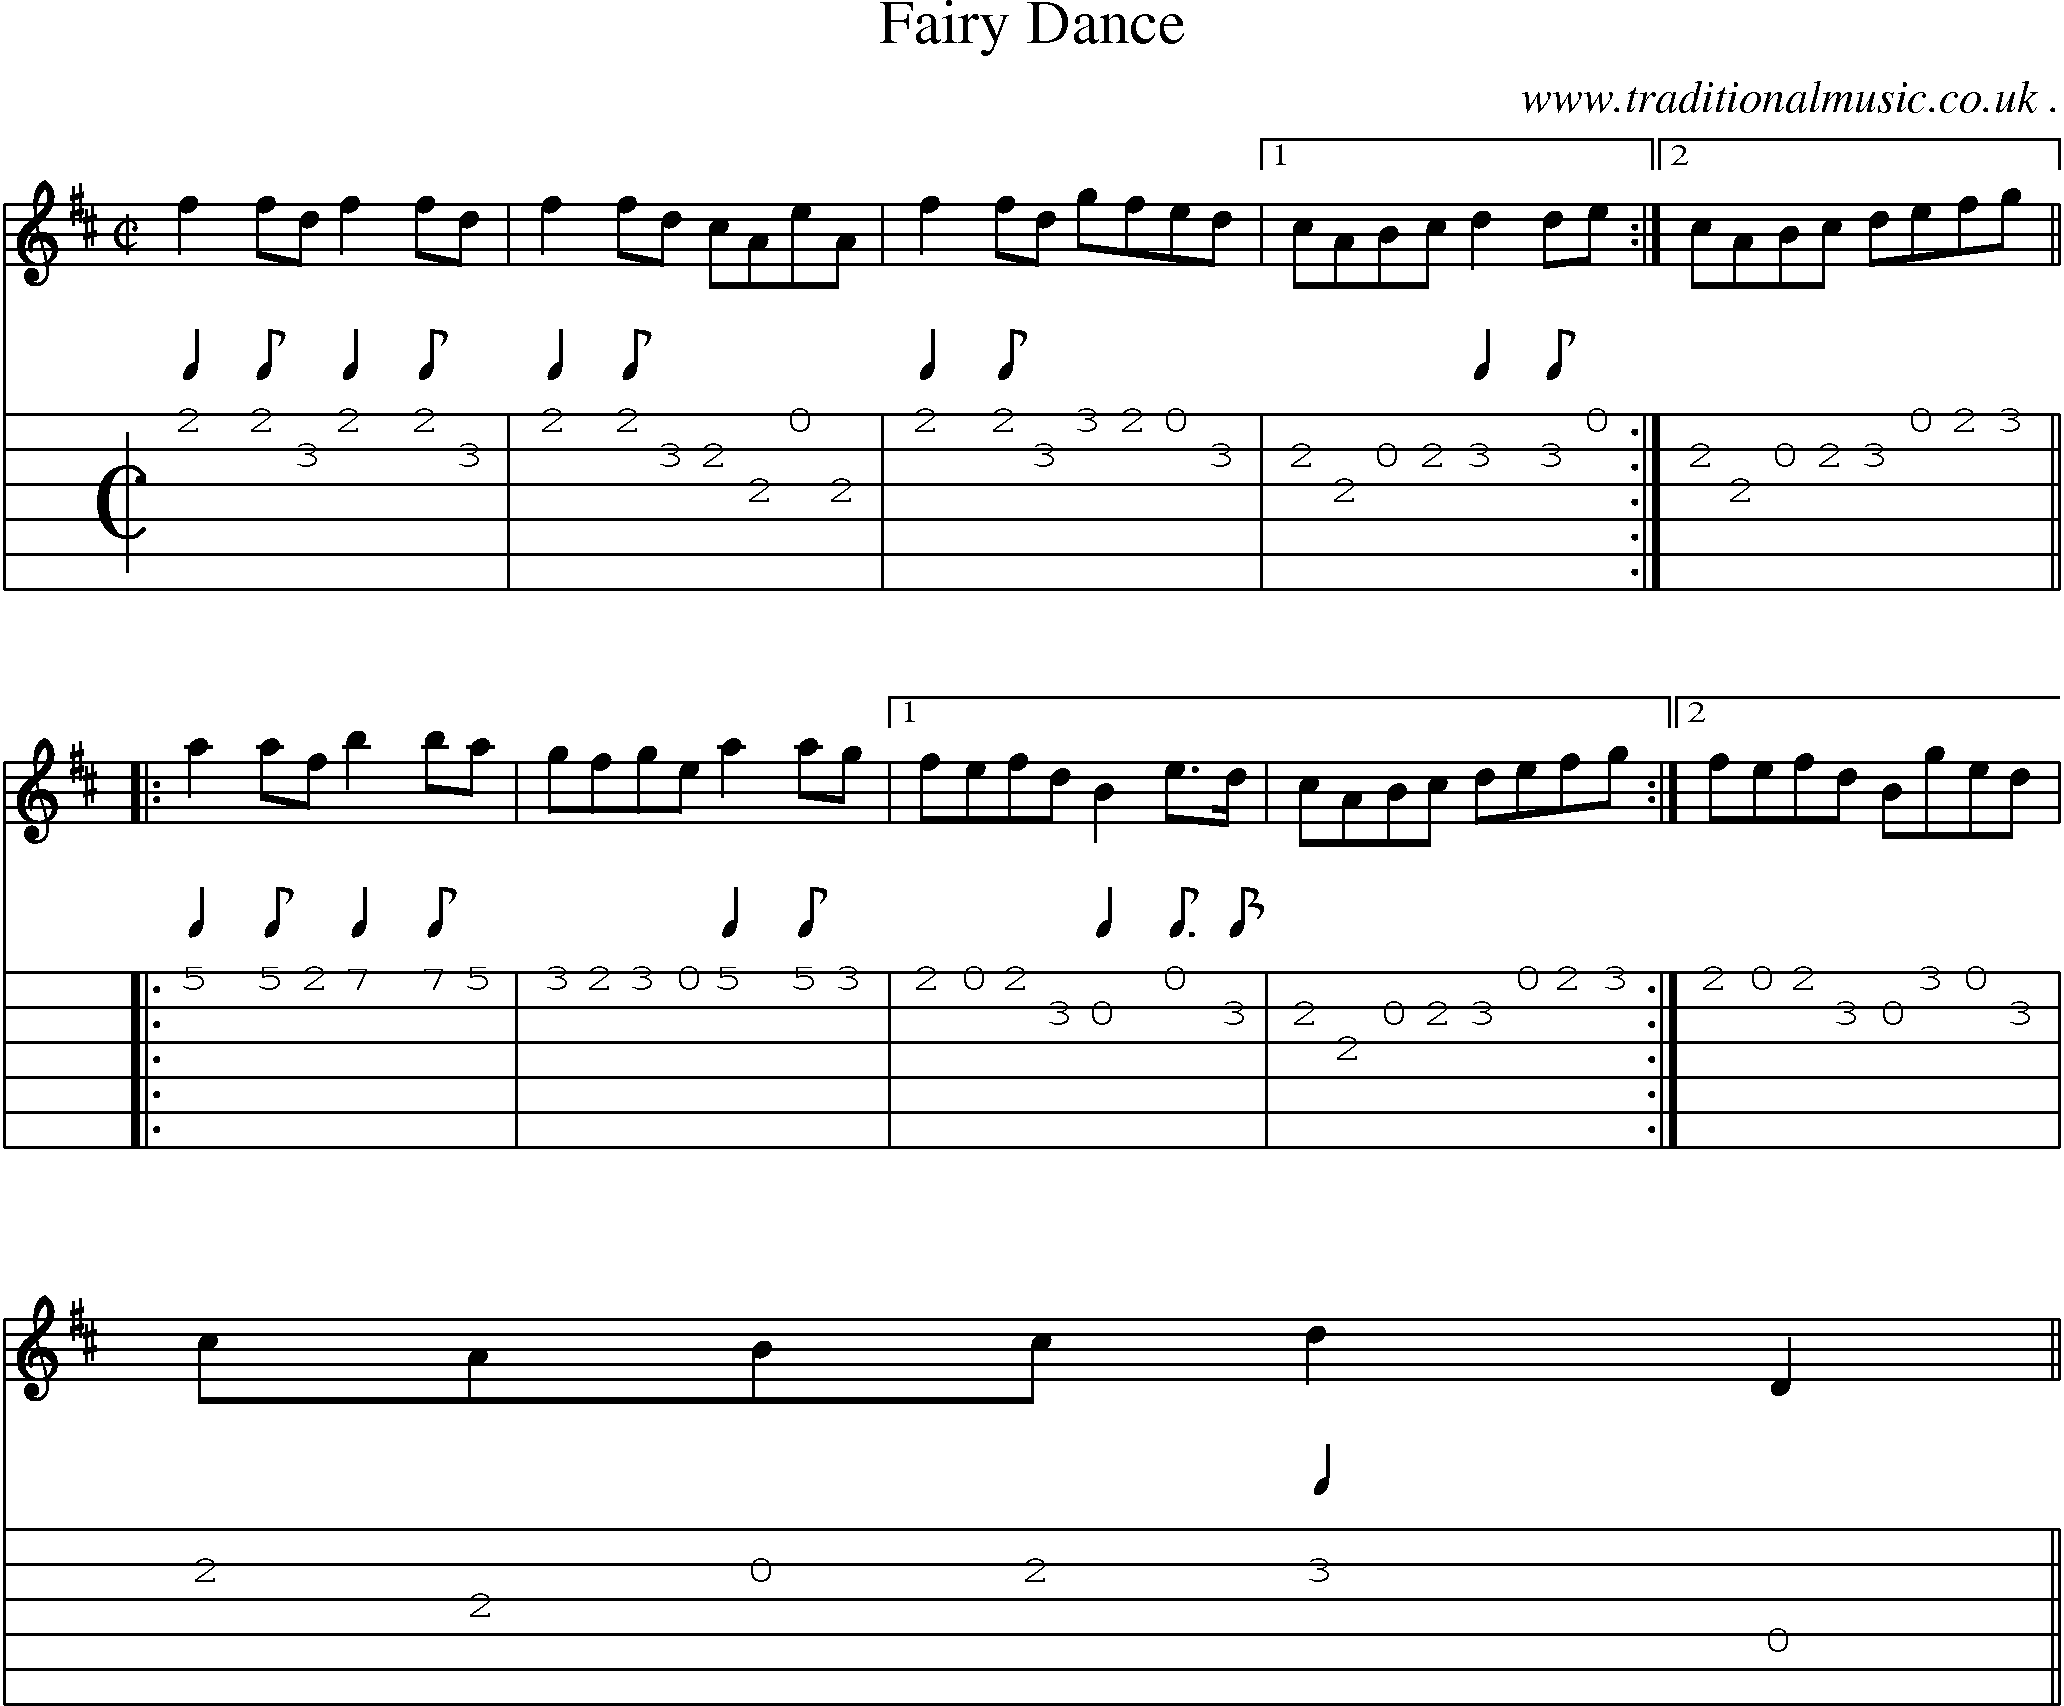 Sheet-music  score, Chords and Guitar Tabs for Fairy Dance